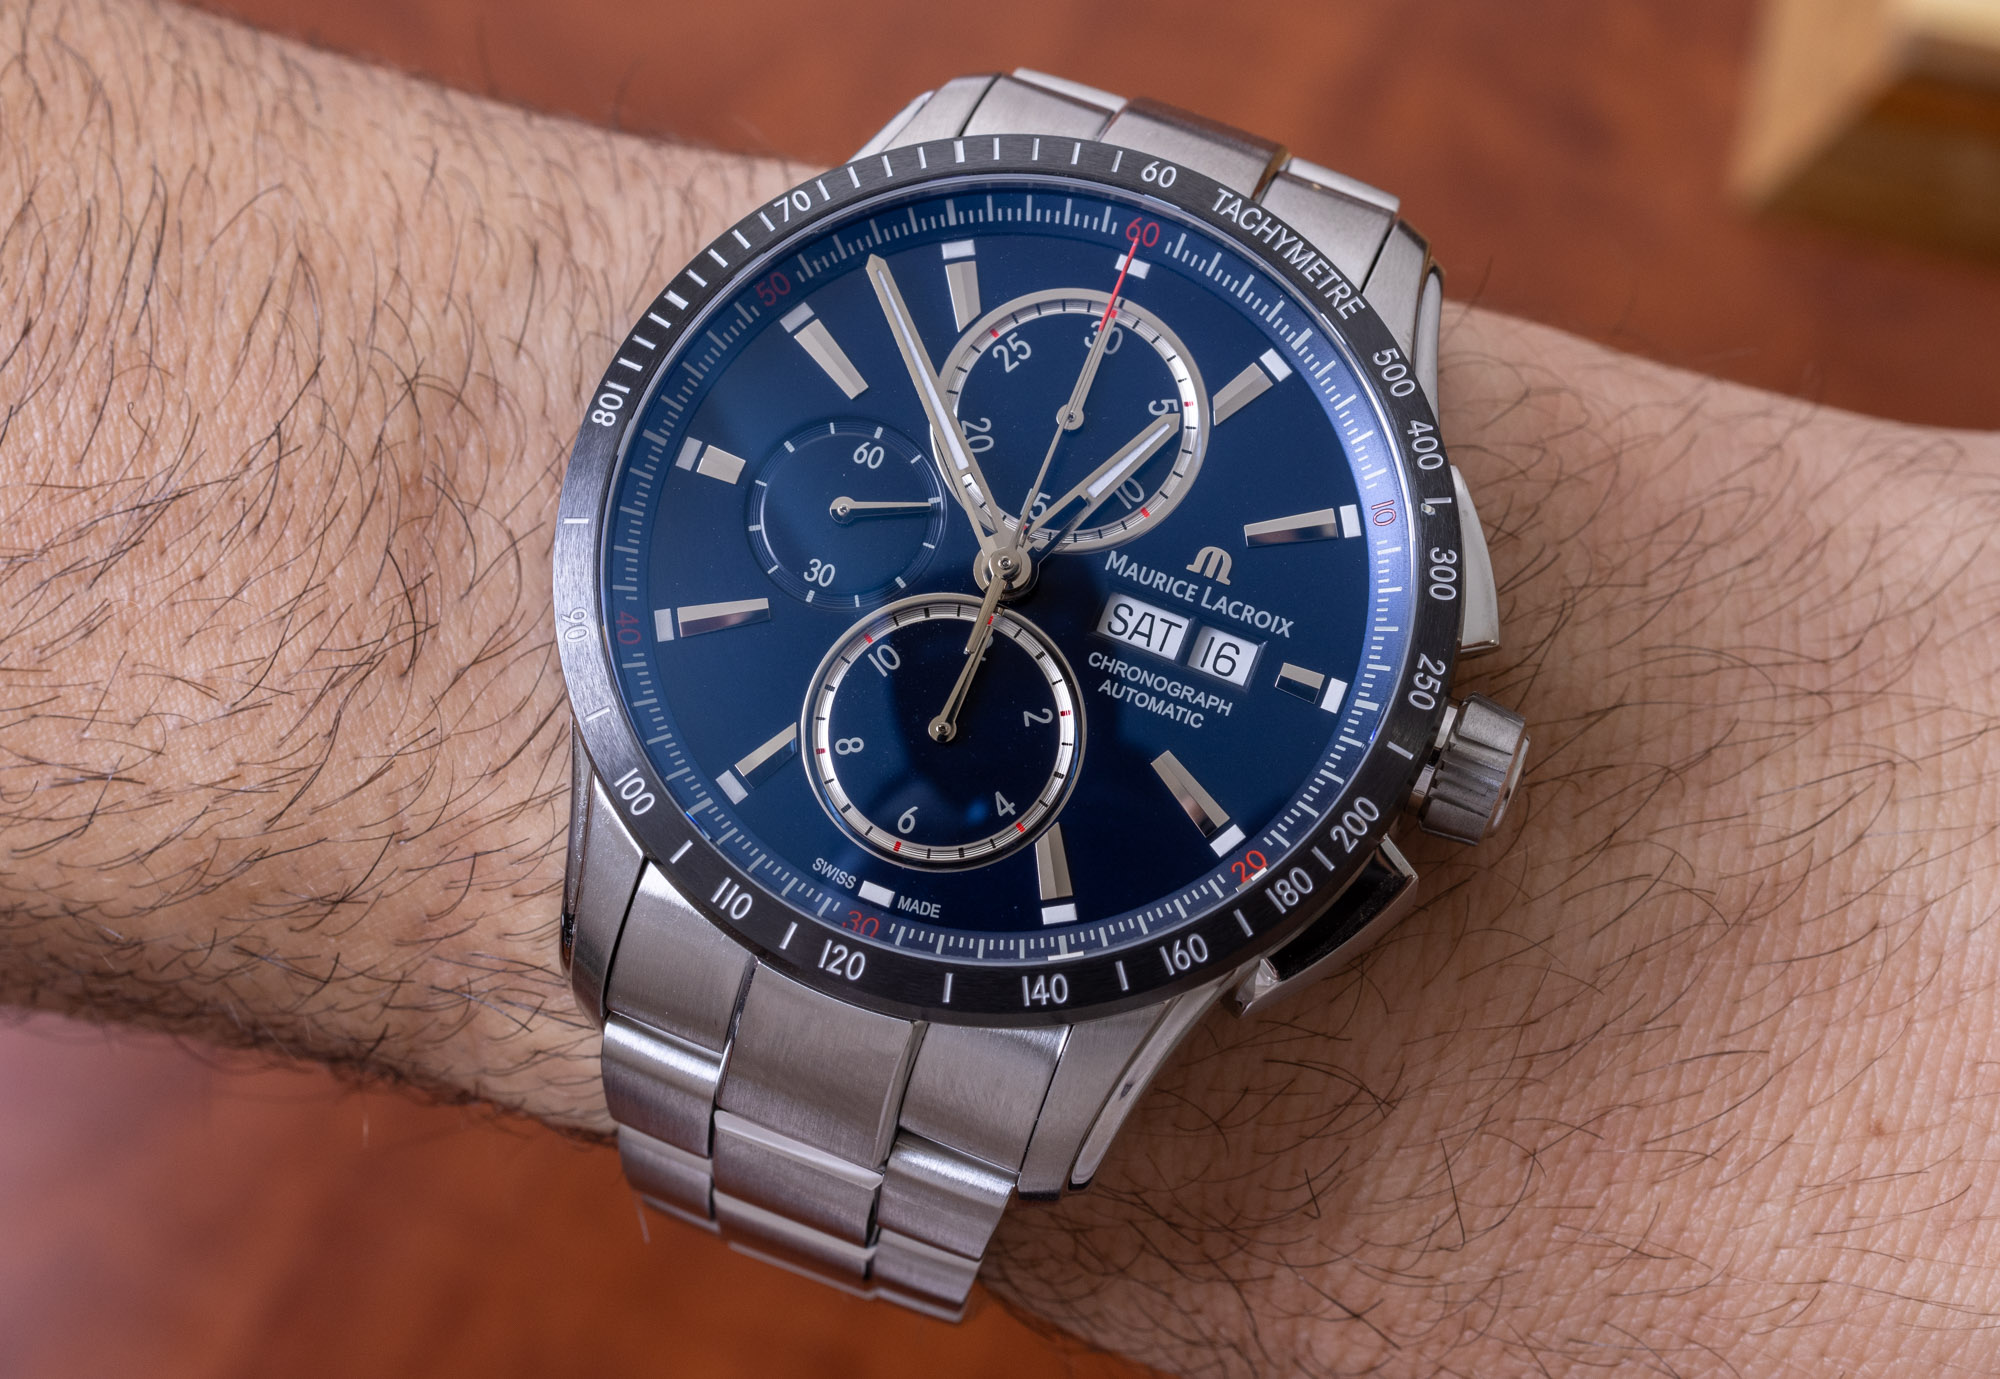 Maurice Chronograph aBlogtoWatch Review: Lacroix | PONTOS S 43mm Watch